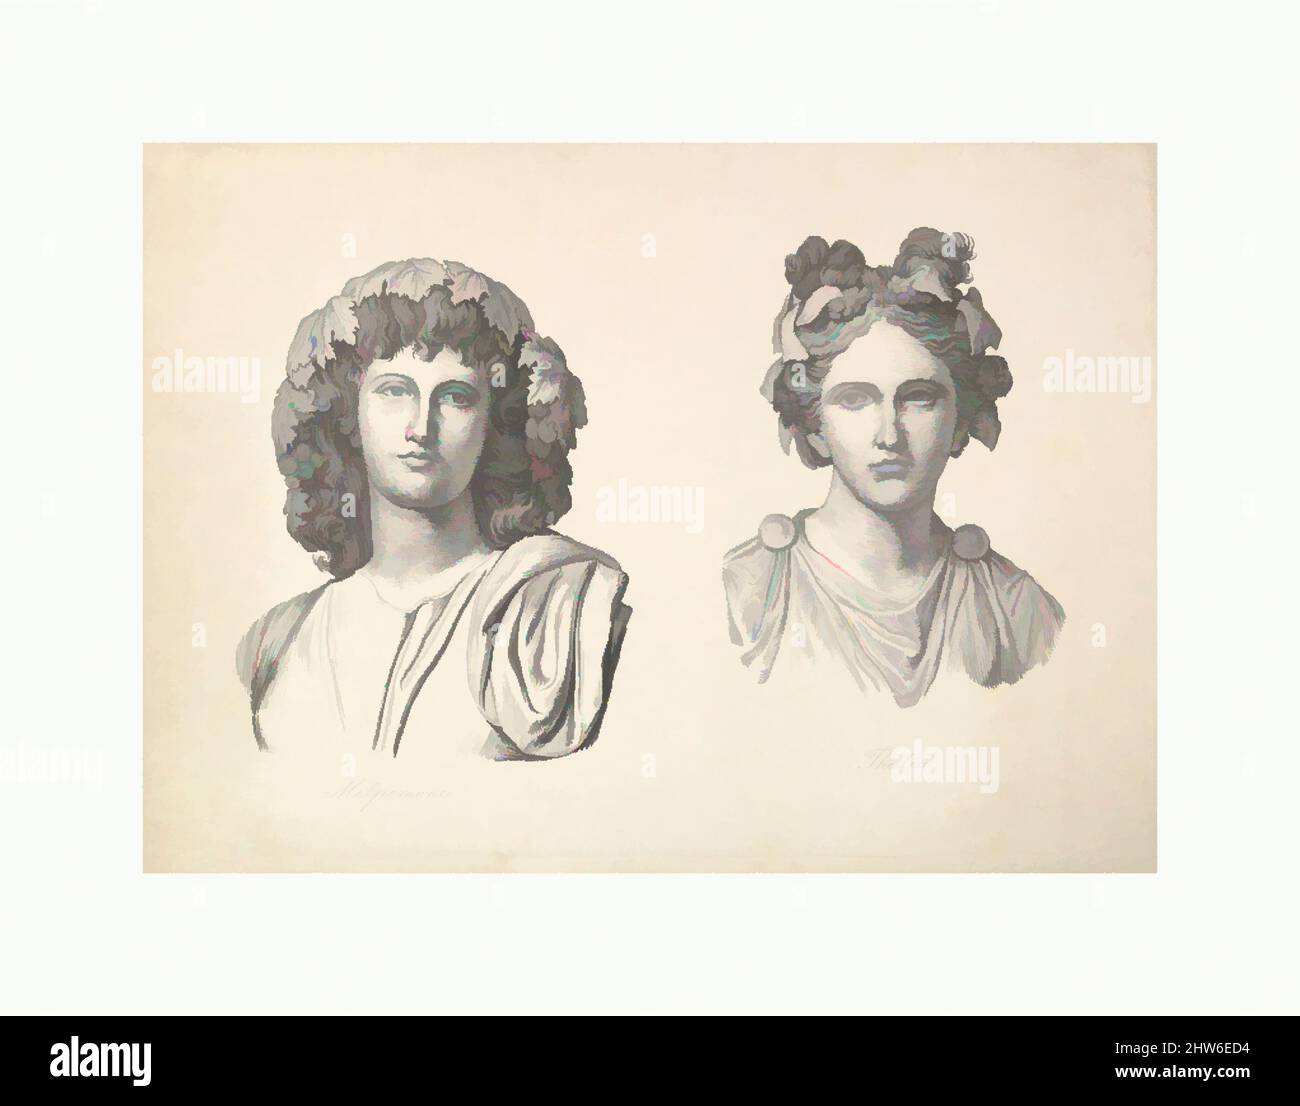 Art inspired by Melpomene and Thalia, 1823–26, Lithograph, sheet: 13 5/8 x 19 5/16 in. (34.6 x 49.1 cm), Prints, Johann Gottfried Schadow (German, Berlin 1764–1850 Berlin, Classic works modernized by Artotop with a splash of modernity. Shapes, color and value, eye-catching visual impact on art. Emotions through freedom of artworks in a contemporary way. A timeless message pursuing a wildly creative new direction. Artists turning to the digital medium and creating the Artotop NFT Stock Photo